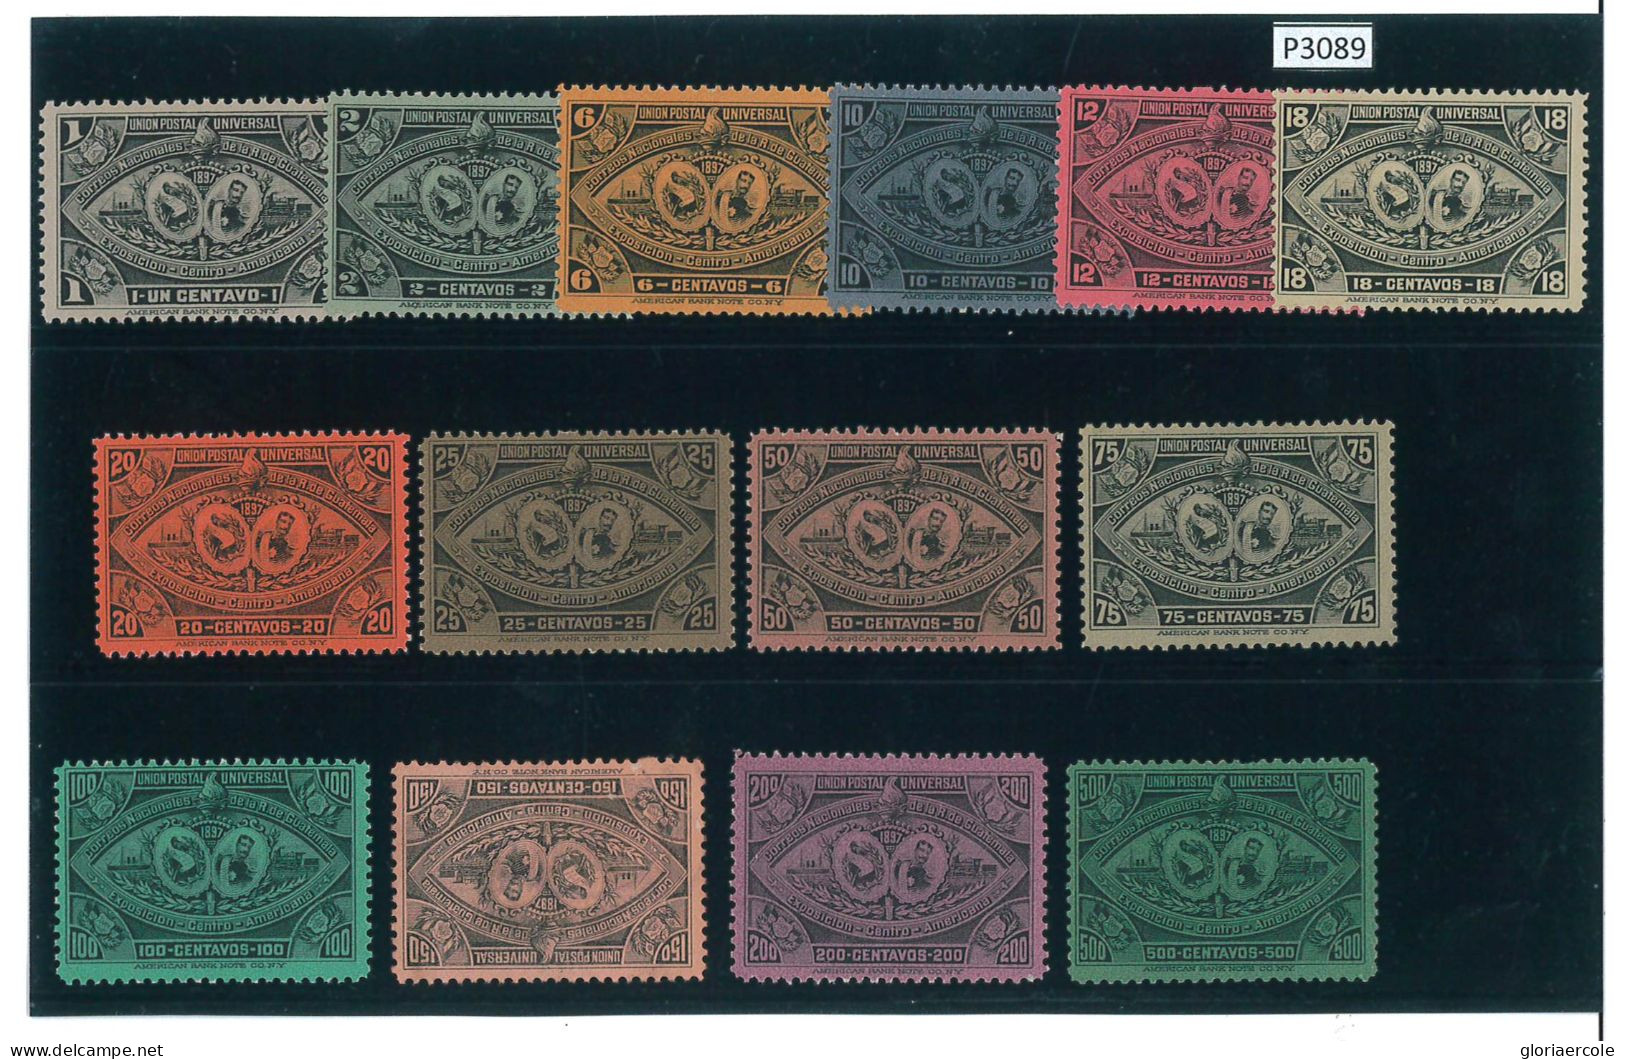 P3089 - GUATEMALA YVERT 62/75 COMPLETE SET. TRAINS TOPICAL. ALL VALUES MNH EXCEPT THE 200 C. (YVERT 74) - Guatemala